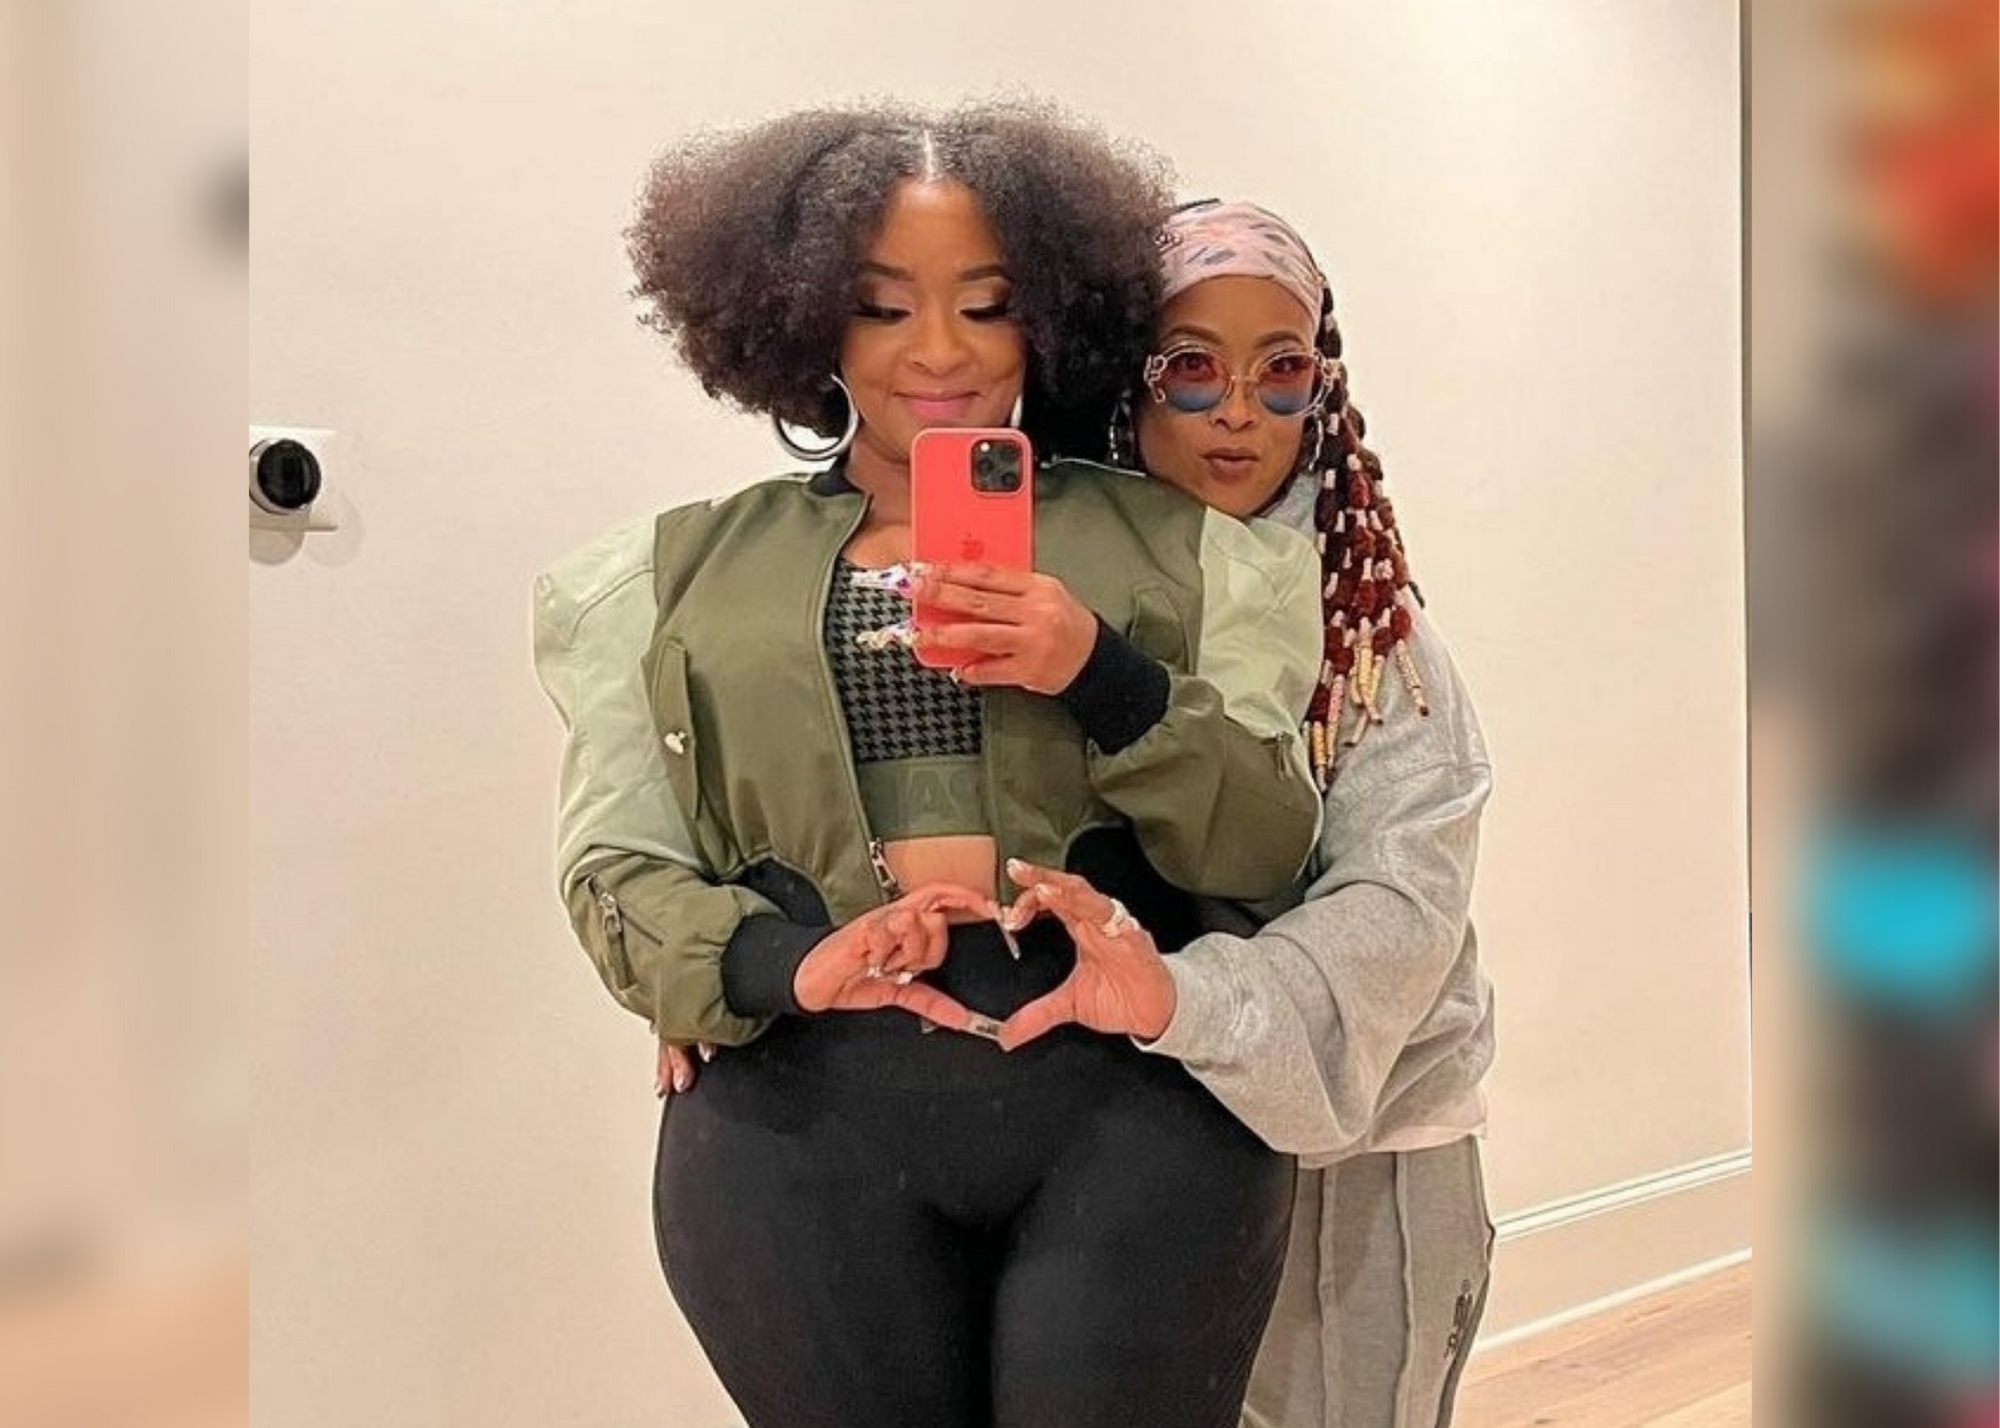 Da Brat and ]esseca Dupart Expecting Their First Child